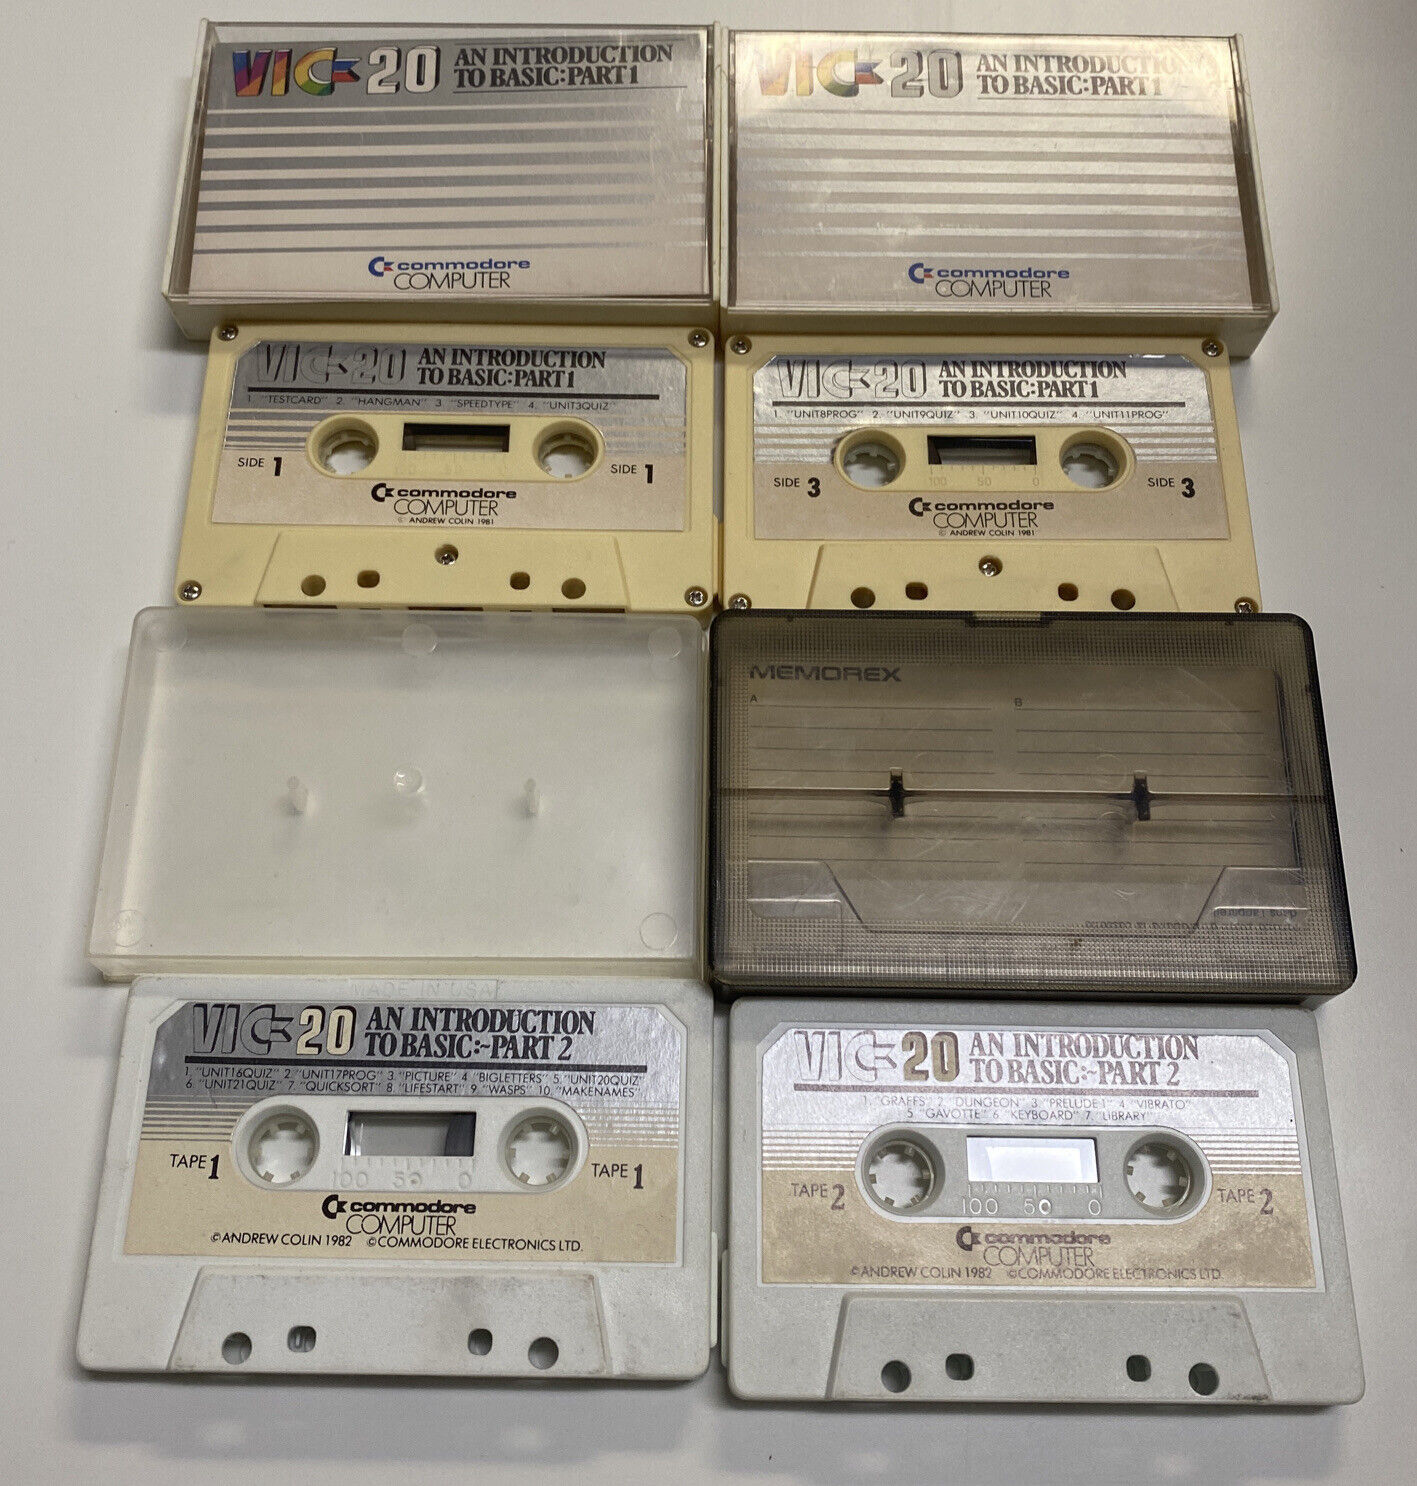 AN INTRODUCTION TO BASIC part 1 Tape 1 & 2 Part 2 Tape 1 & 2 commodore vic-20